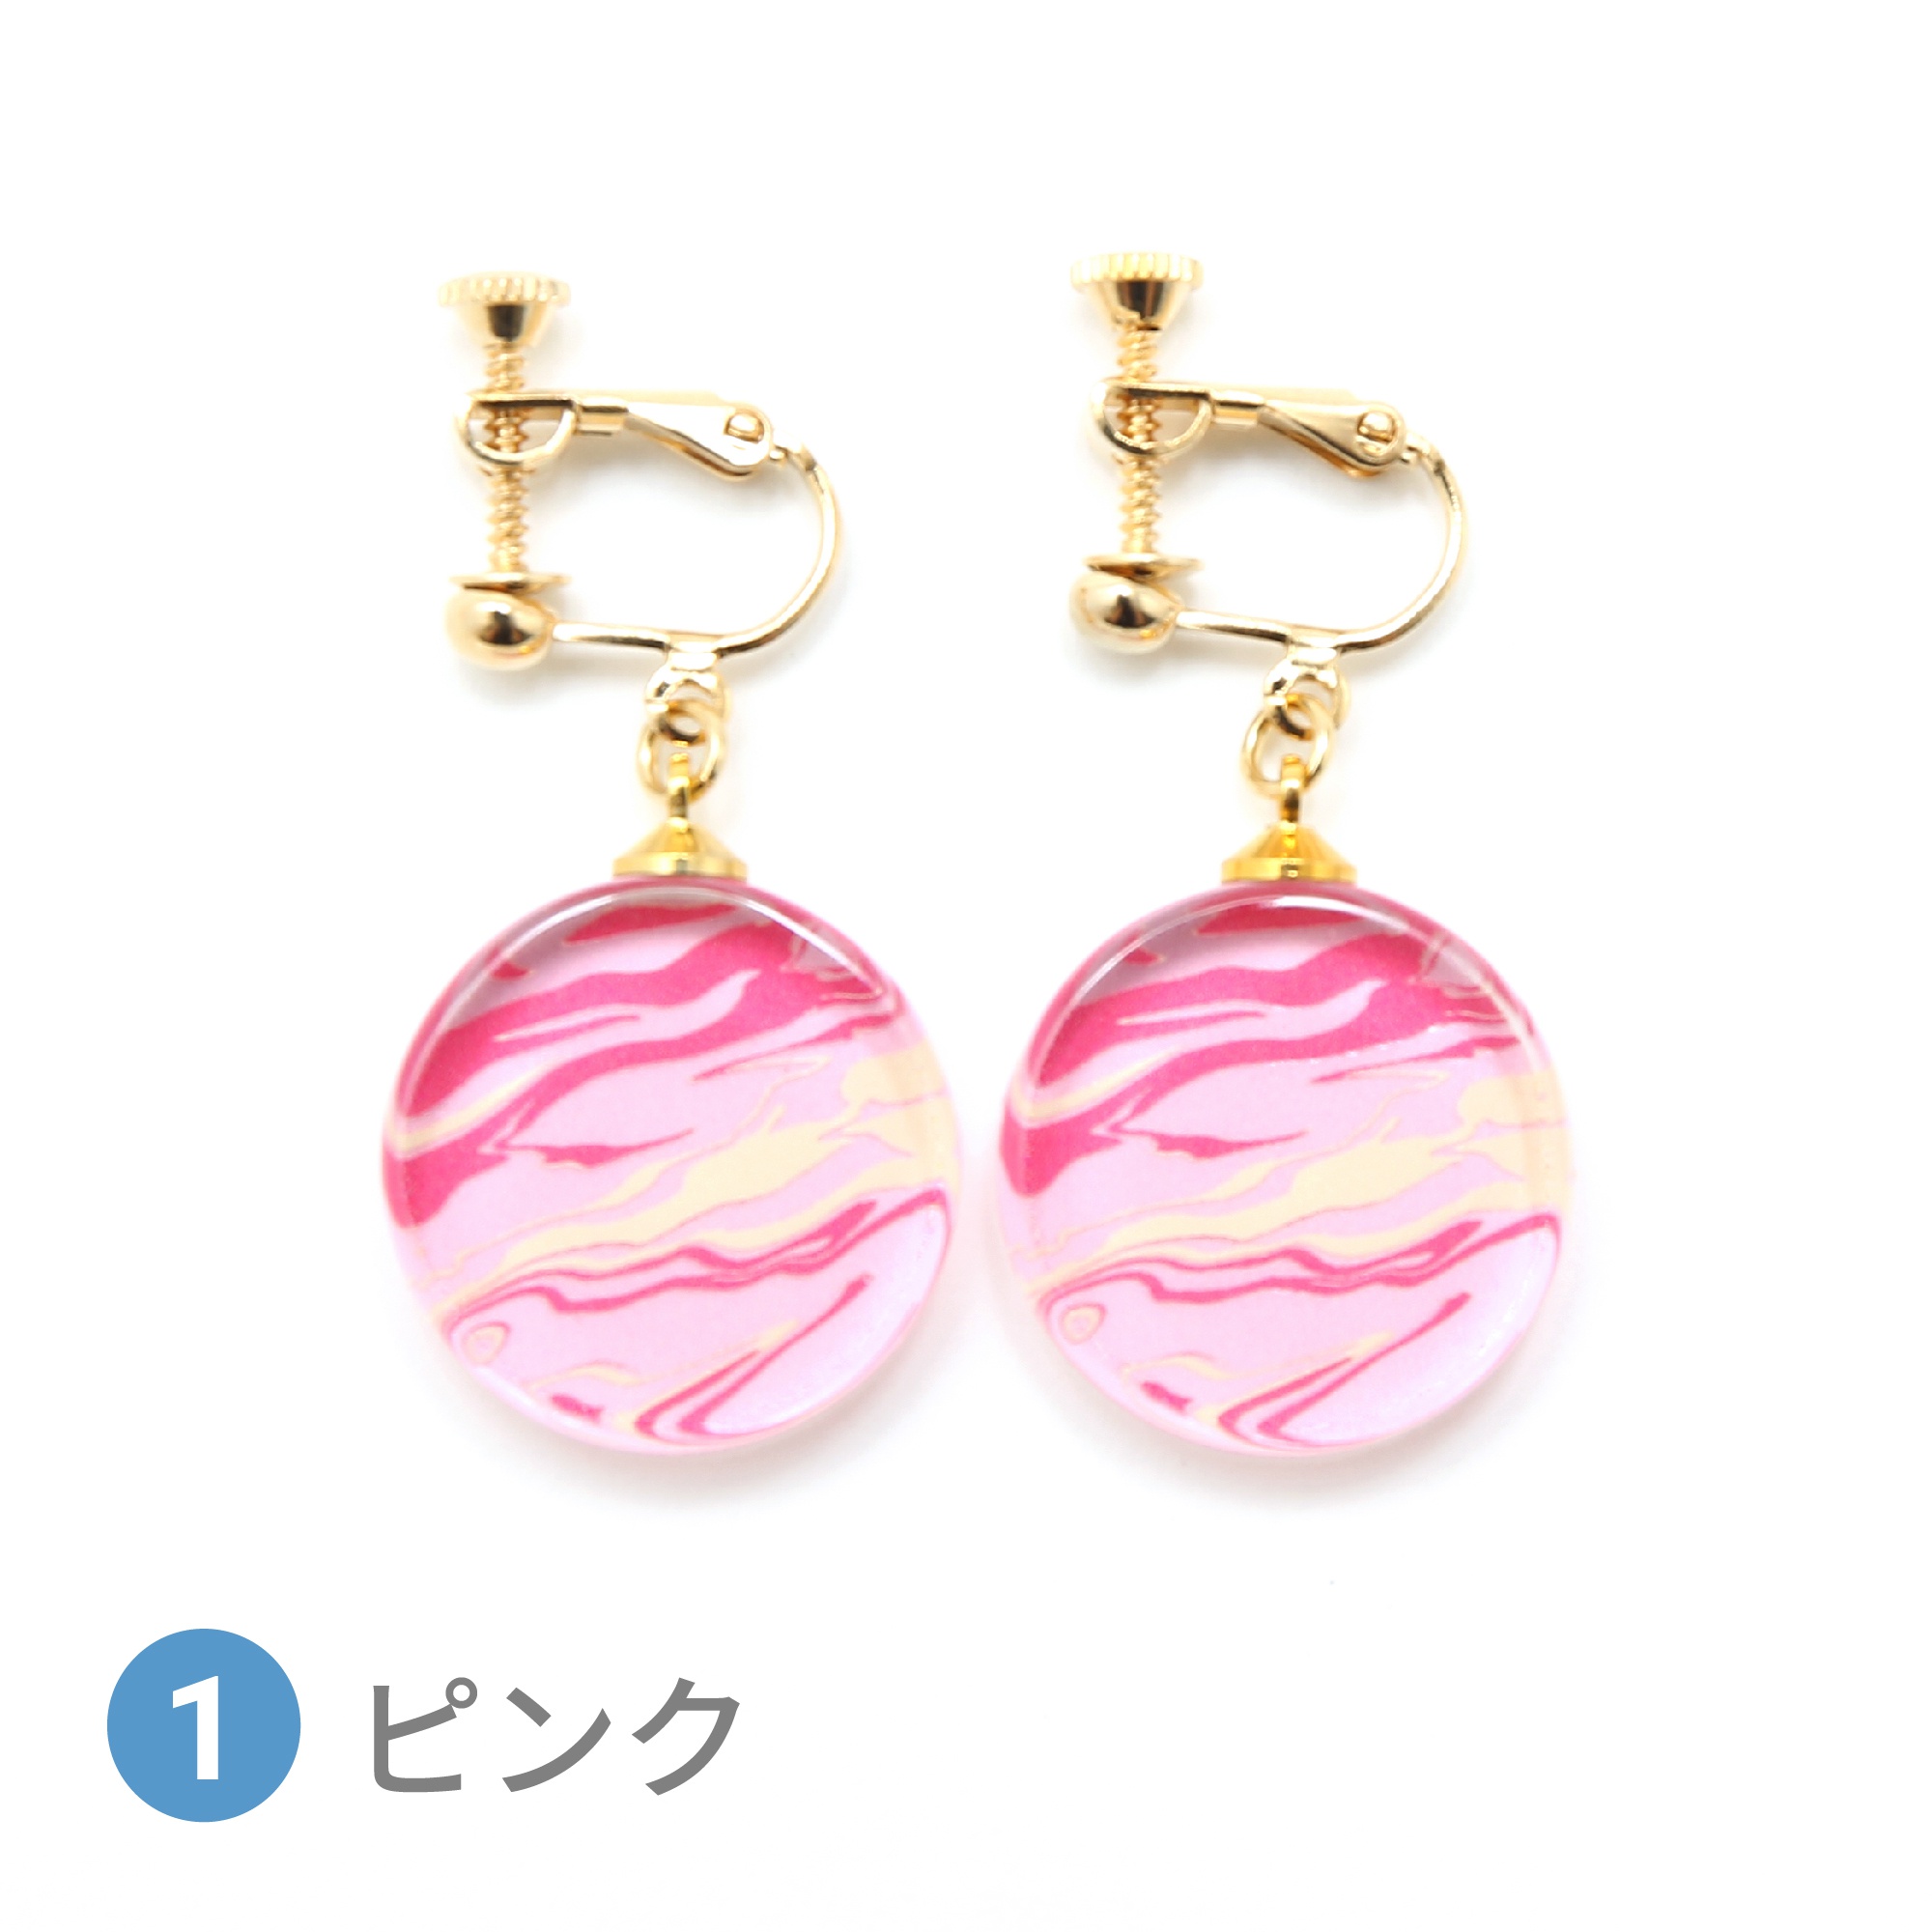 Glass accessories Earring MARBLE pink round shape